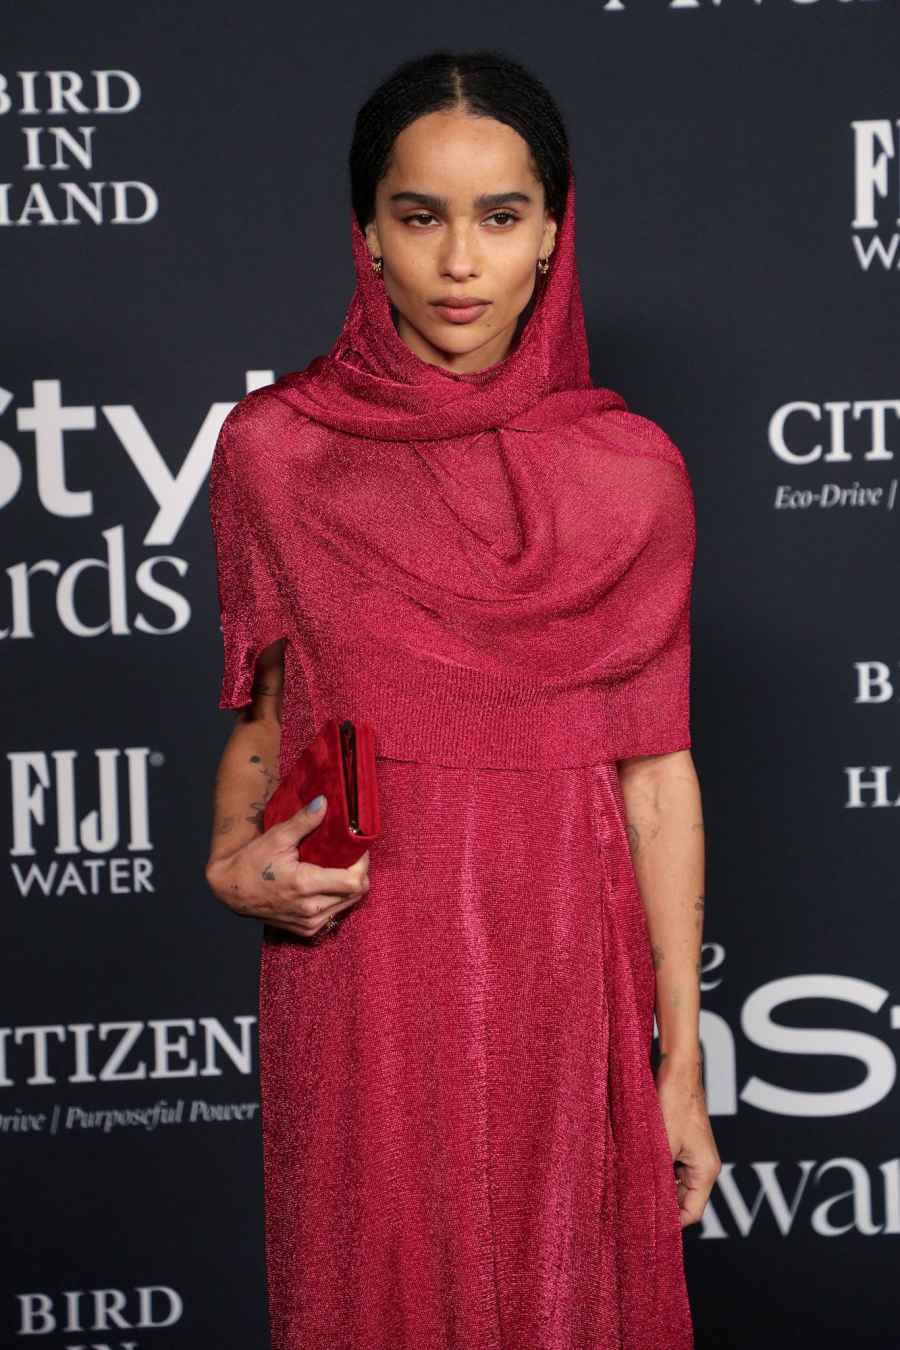 Zoe Kravitz May Never Have Kids, Doesn’t ‘Feel Pressured’ to Become a Mom